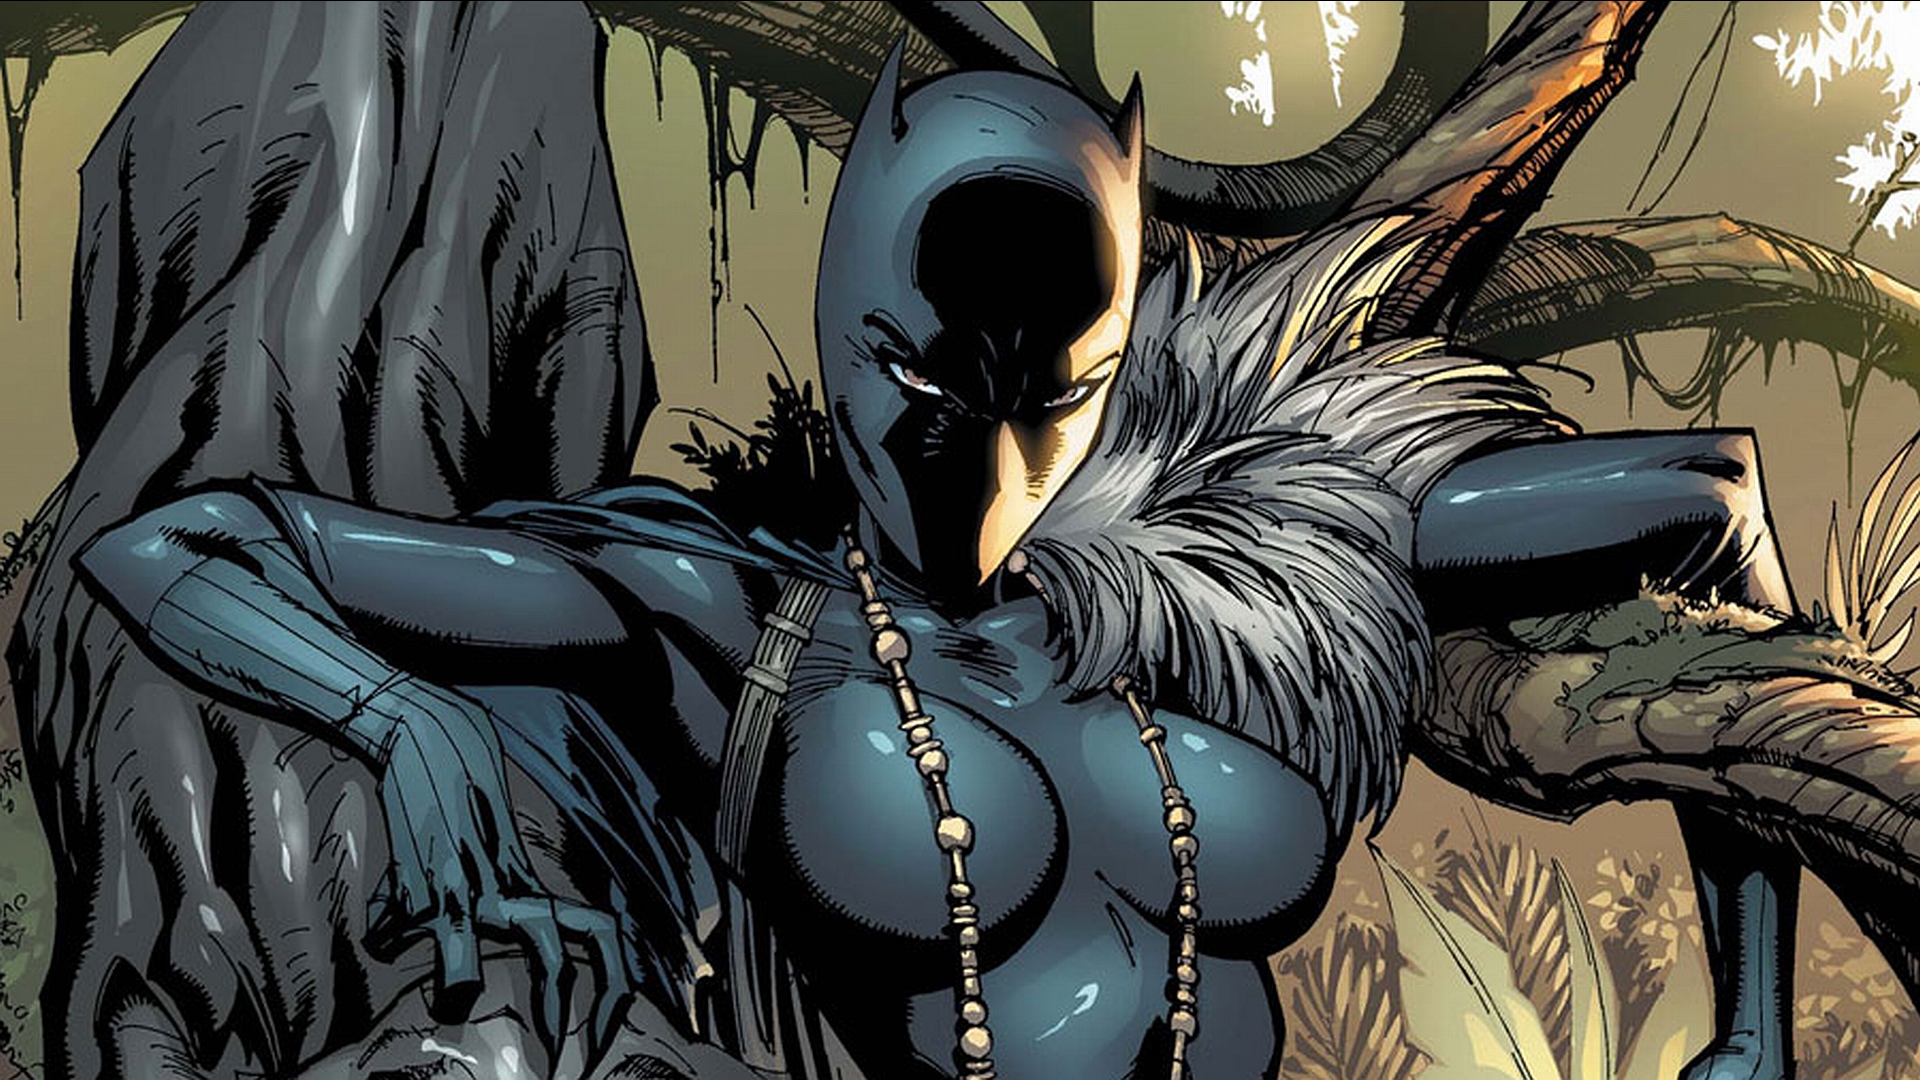 Black Panther in a vibrant comic book style, showcasing the iconic Marvel superhero.